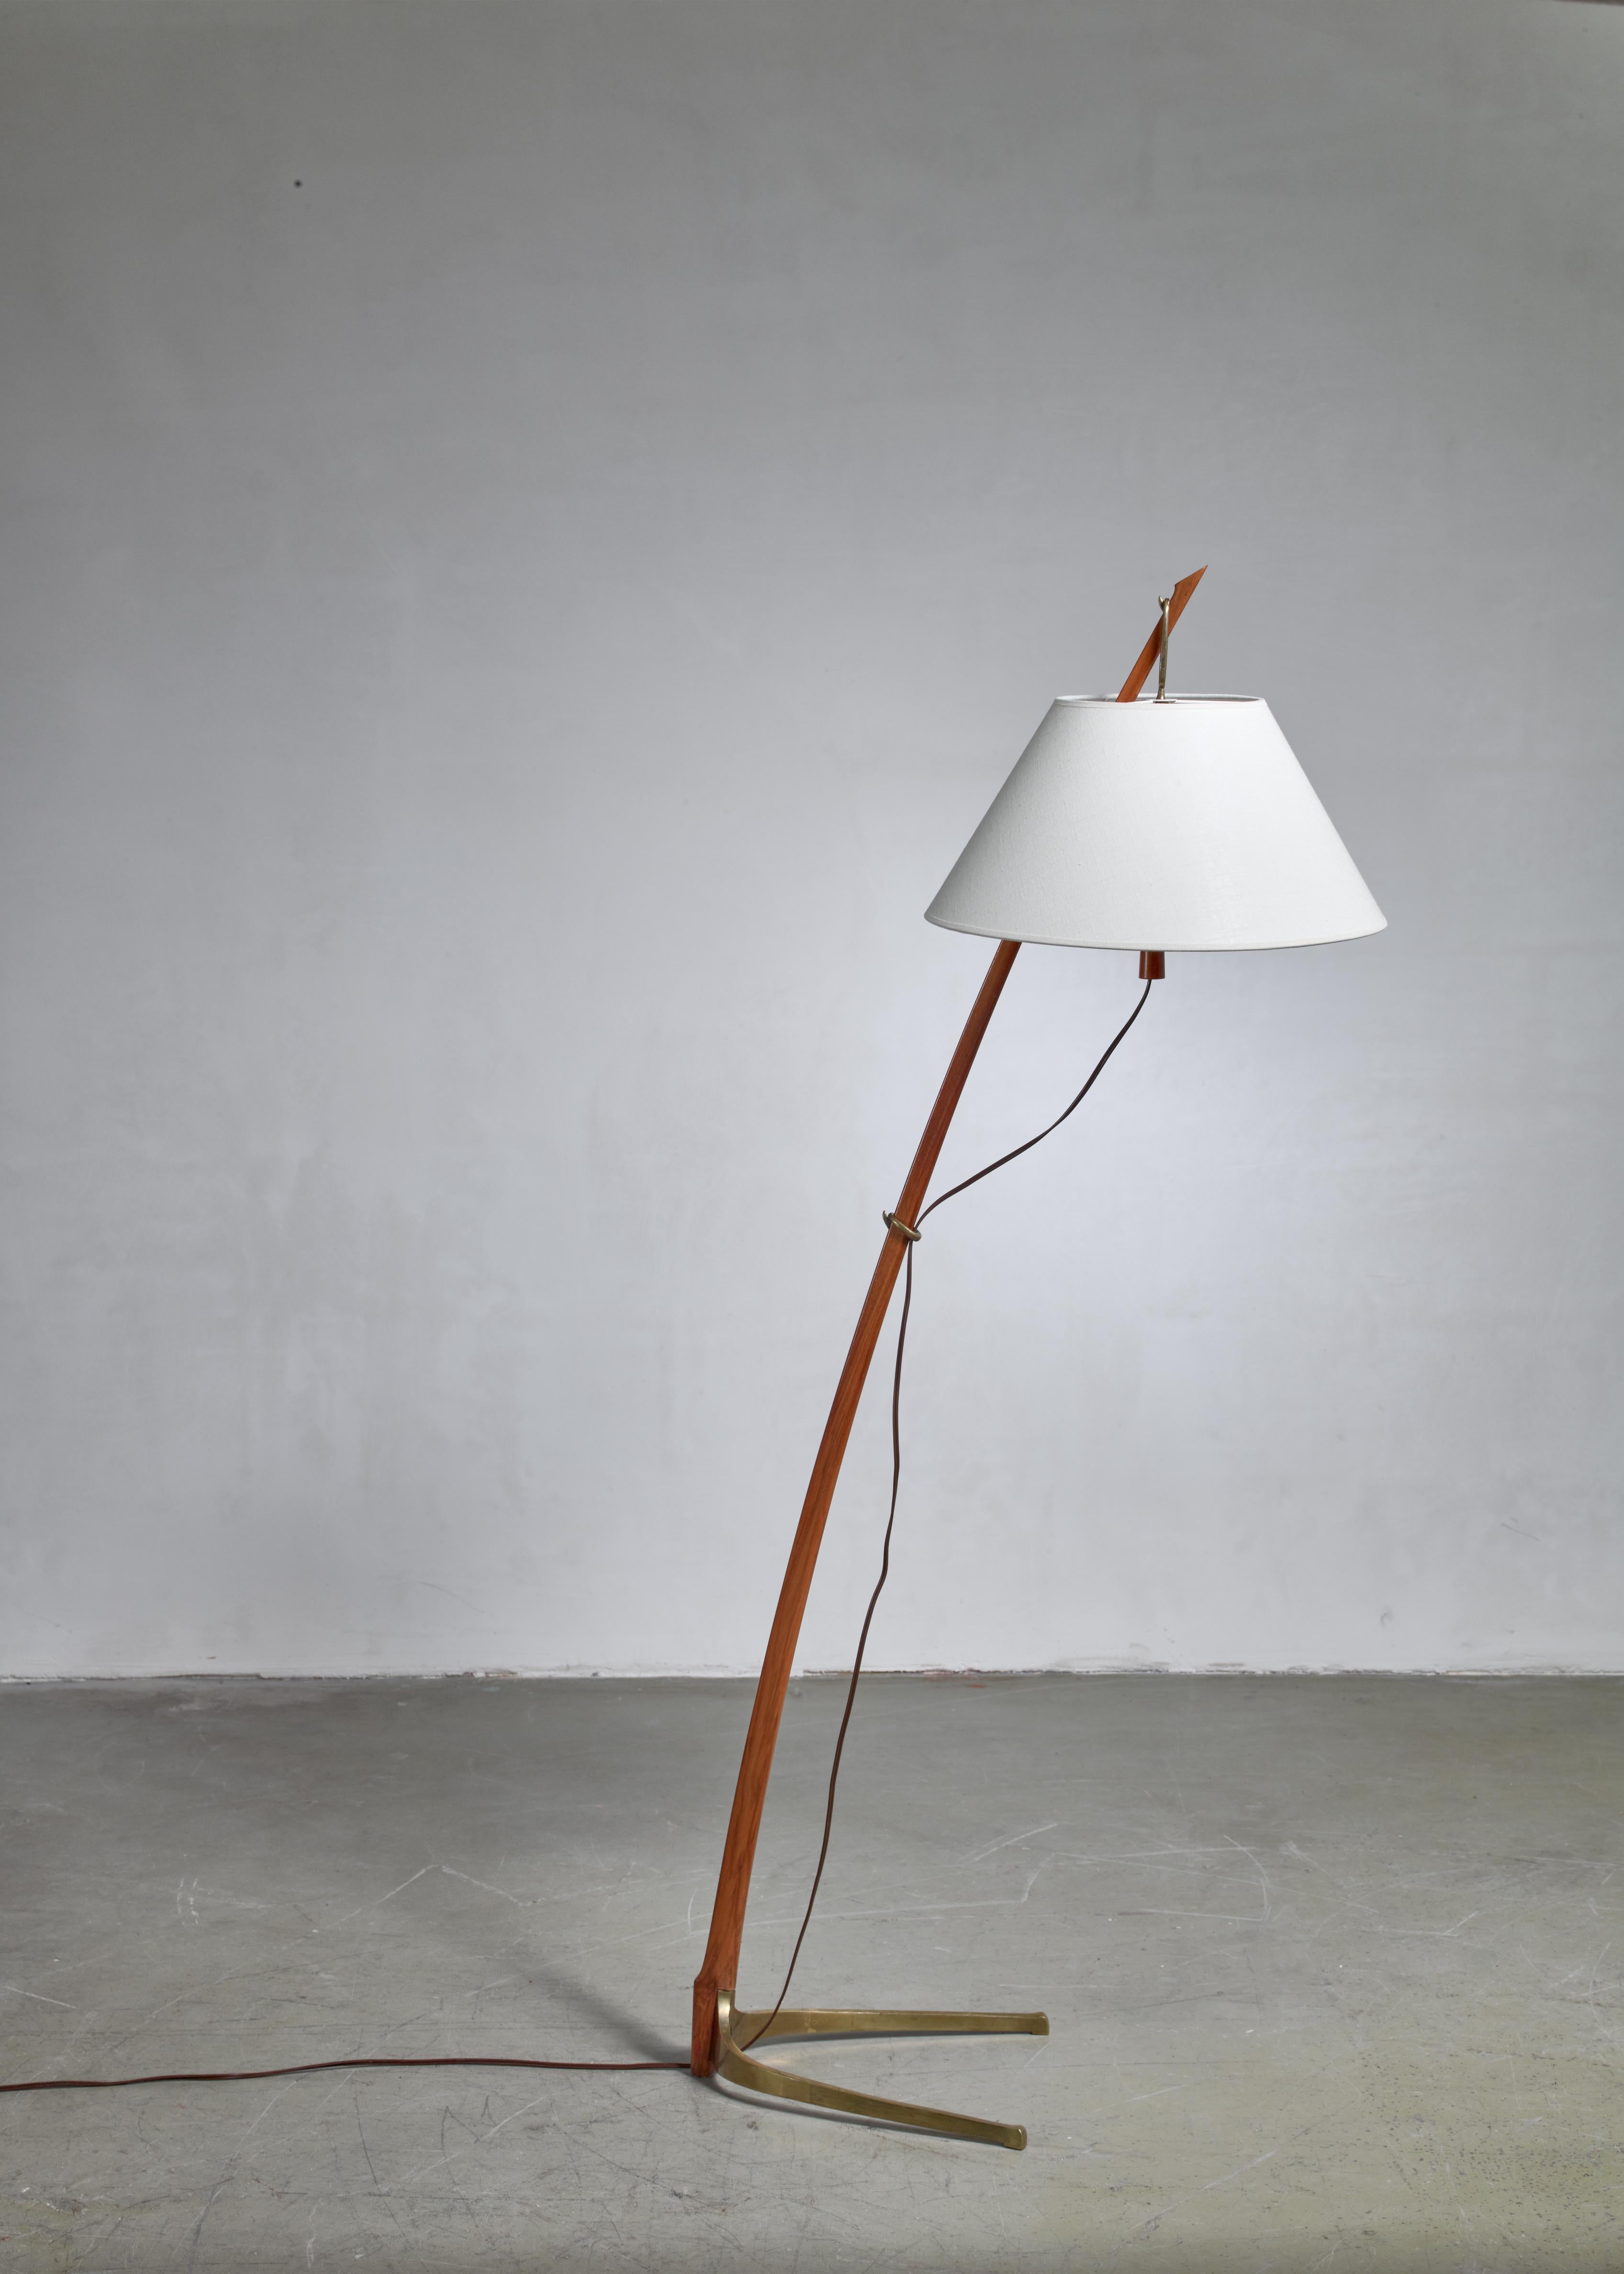 A beautiful Dornstab (‘thorn stick’) floor lamp, designed in 1947 by J.T. Kalmar. It is made out of a wooden, saber shaped stem with a curved brass base and fabric shade. The height of the shade is adjustable to three different positions on the